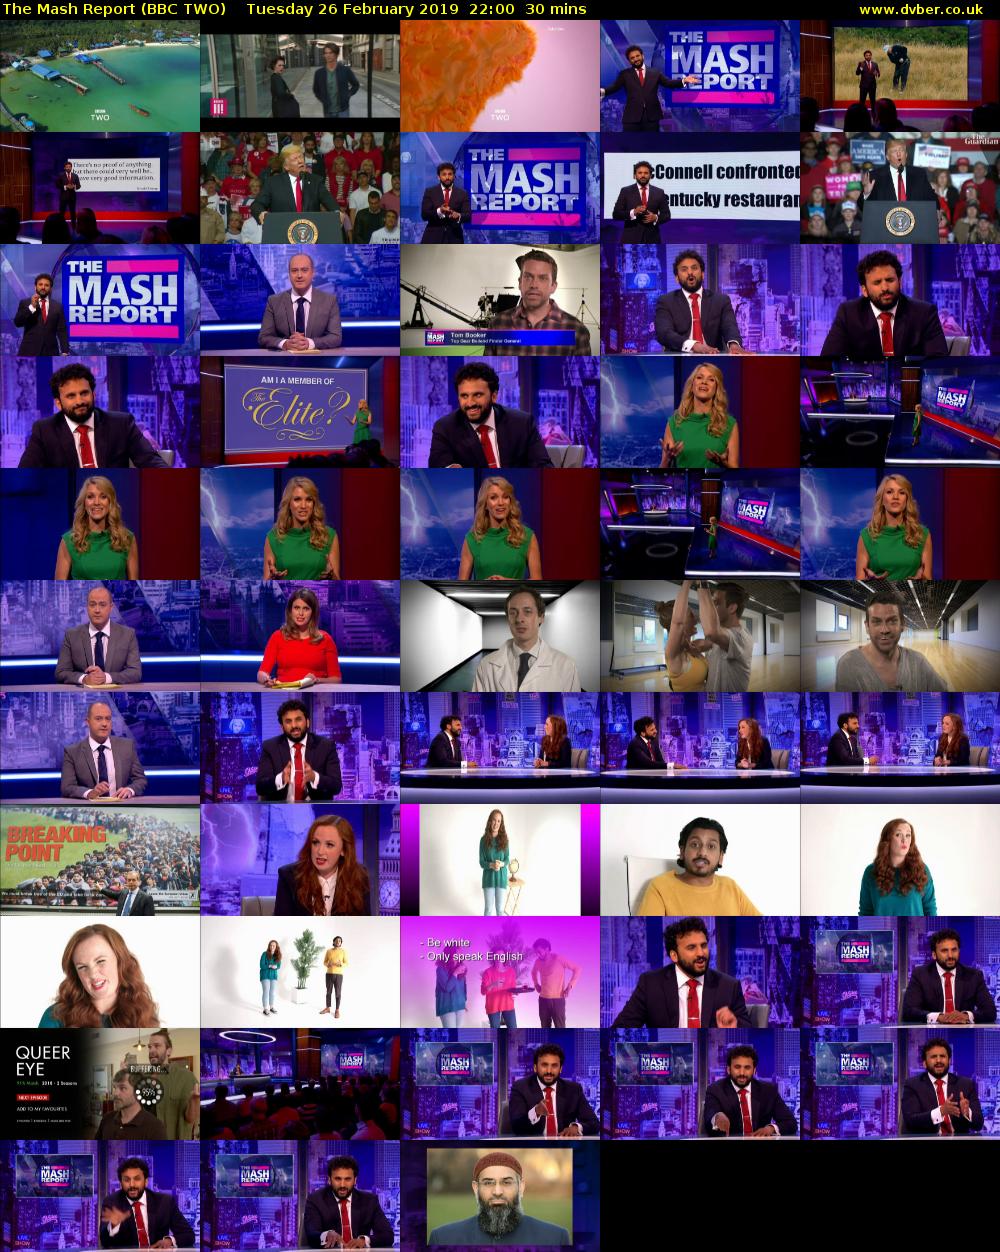 The Mash Report (BBC TWO) Tuesday 26 February 2019 22:00 - 22:30